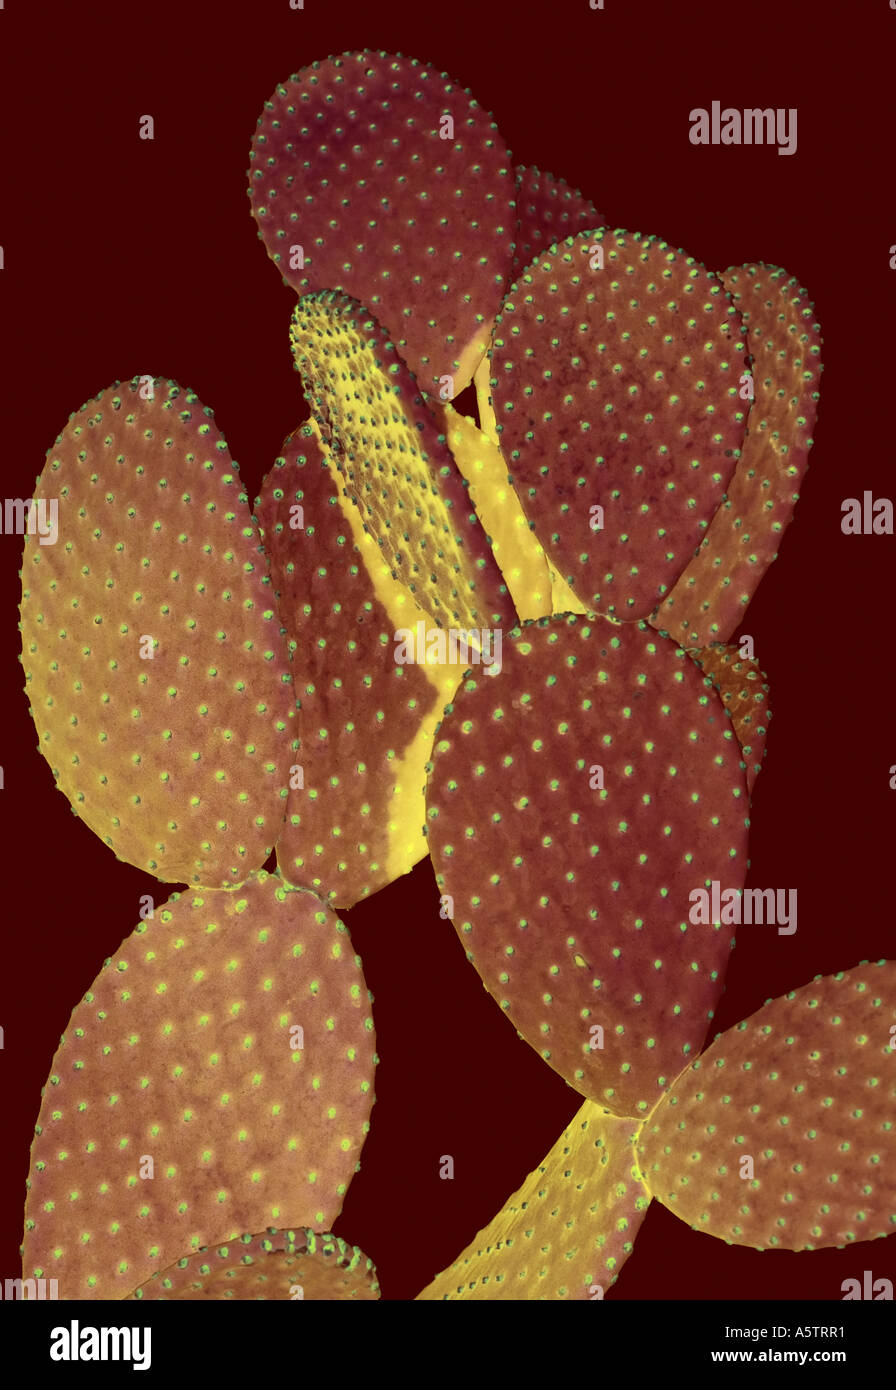 Graphic photo-illustration of a Cactus. Stock Photo